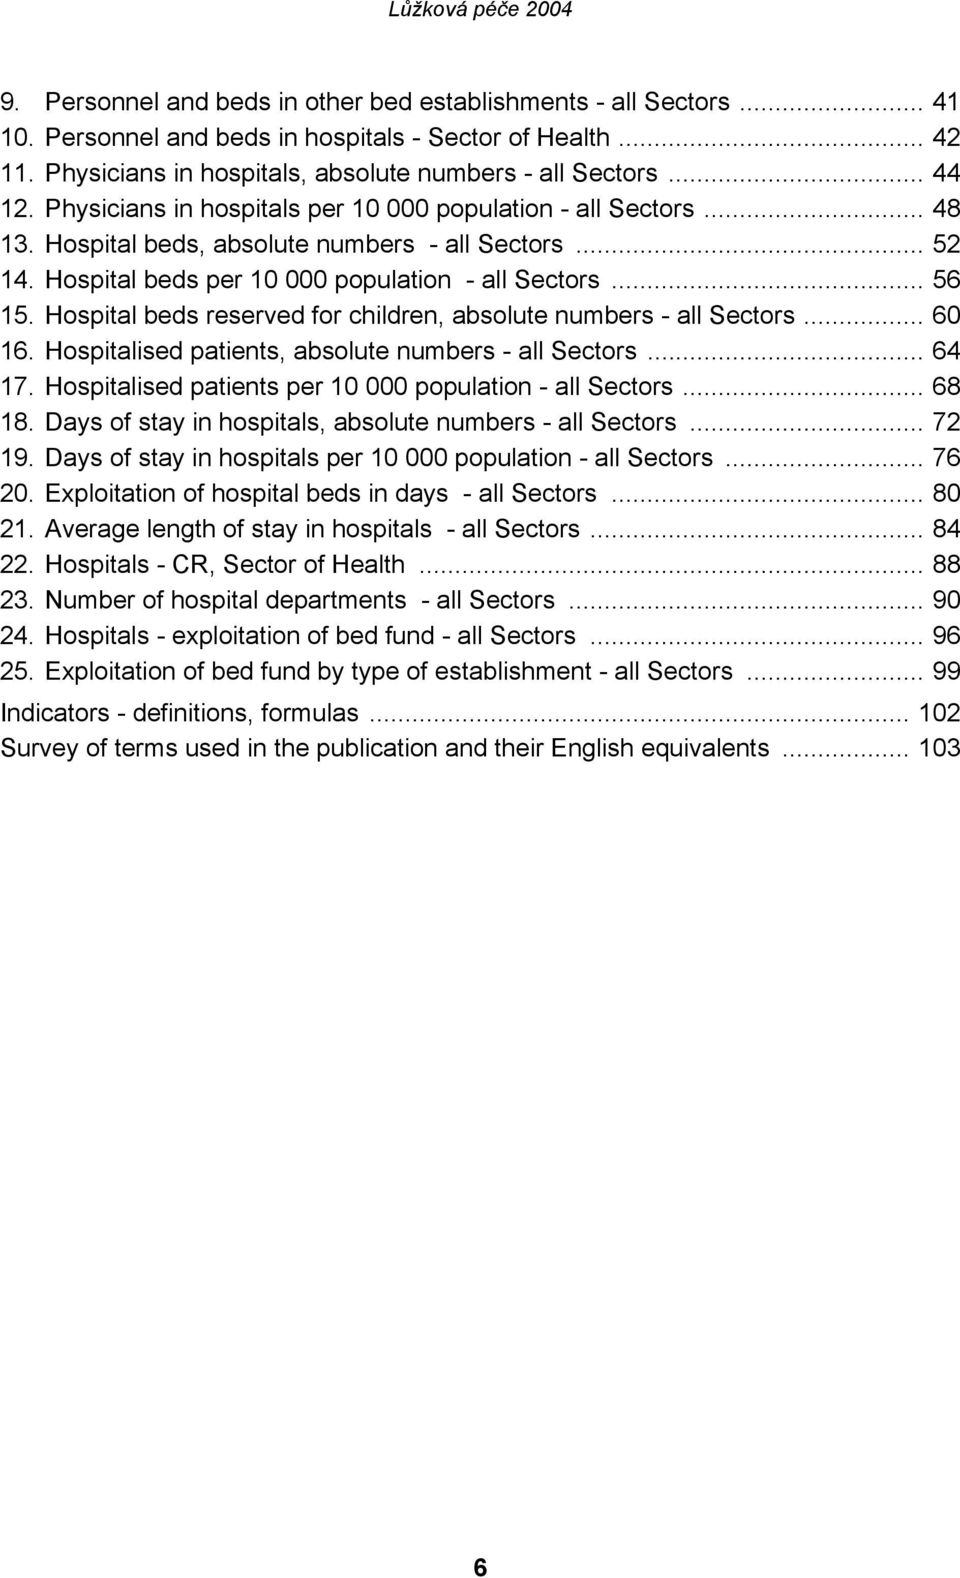 Hospital beds reserved for children, absolute numbers - all Sectors... 60 16. Hospitalised patients, absolute numbers - all Sectors... 64 17. Hospitalised patients per 10 000 population - all Sectors.